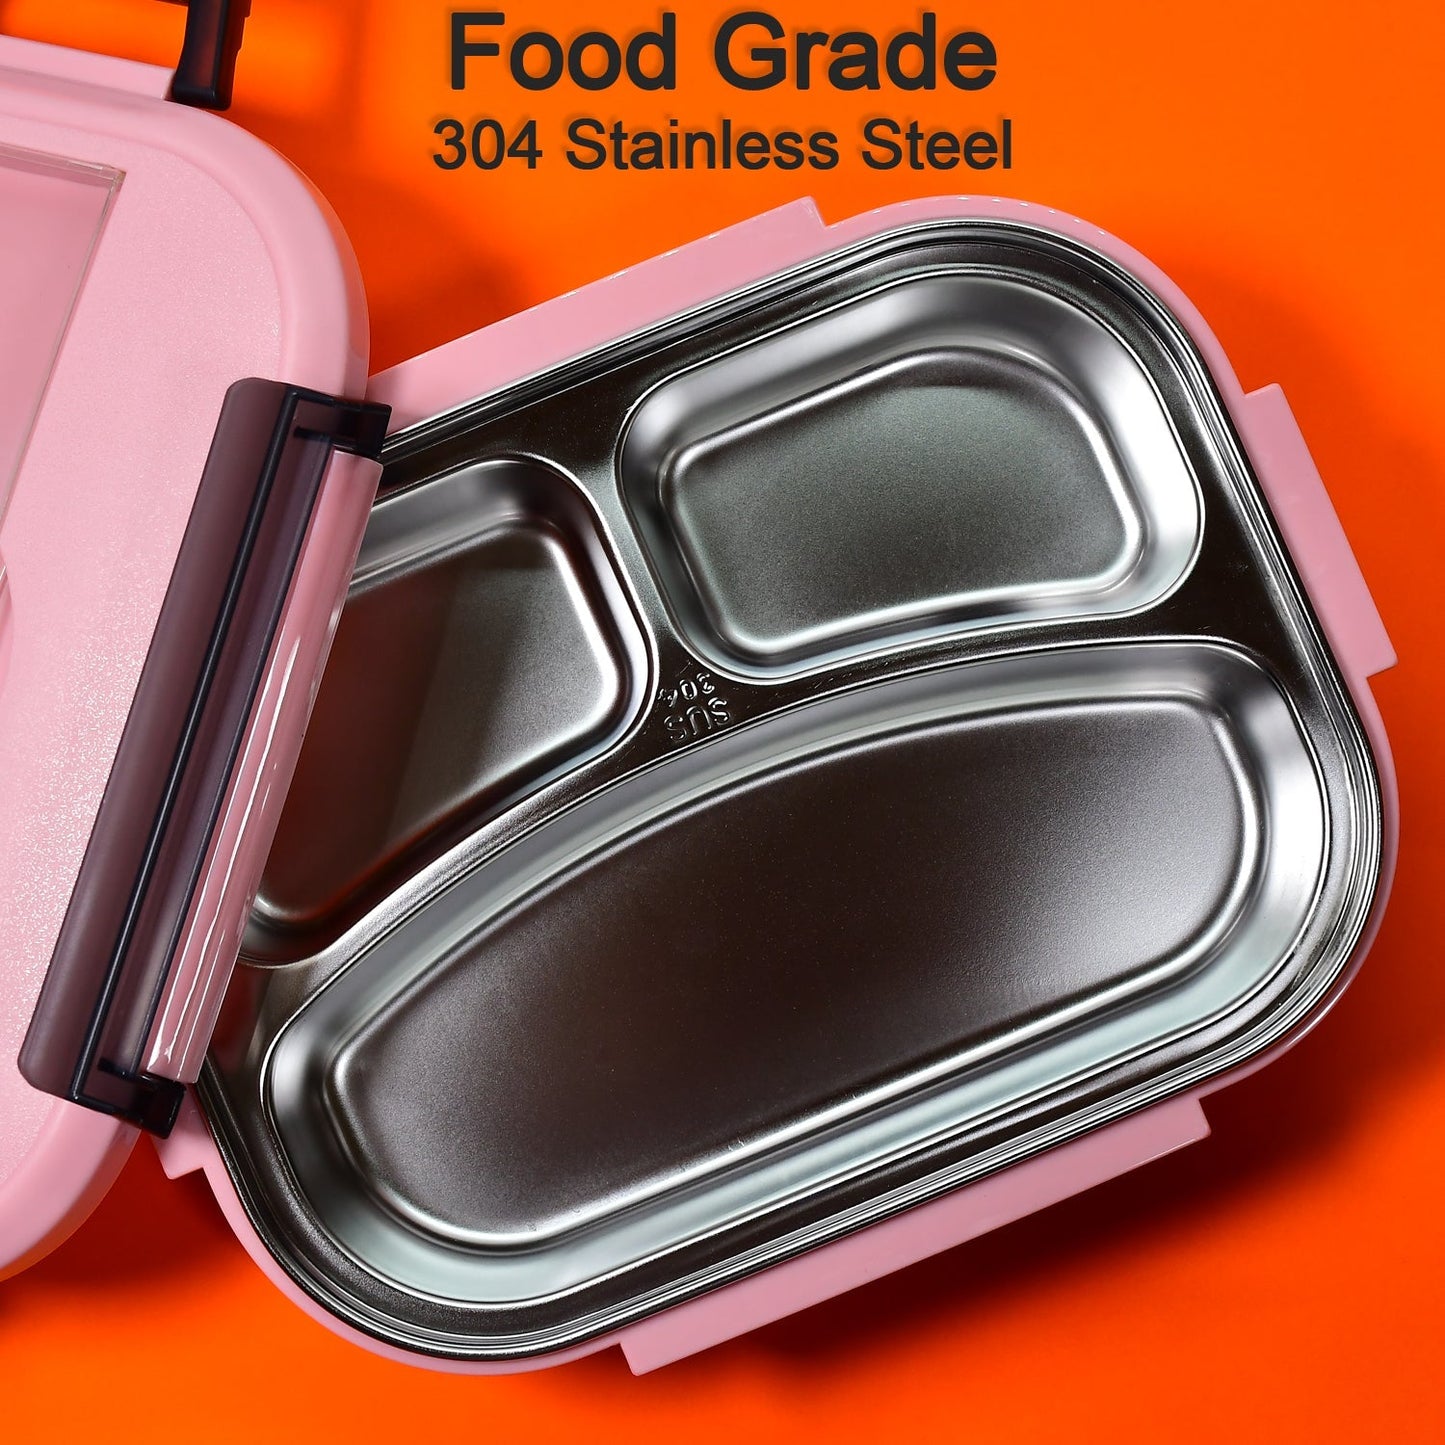 2041 Pink Lunch Box for Kids and adults, Stainless Steel Lunch Box with 3 Compartments With spoon slot. DeoDap